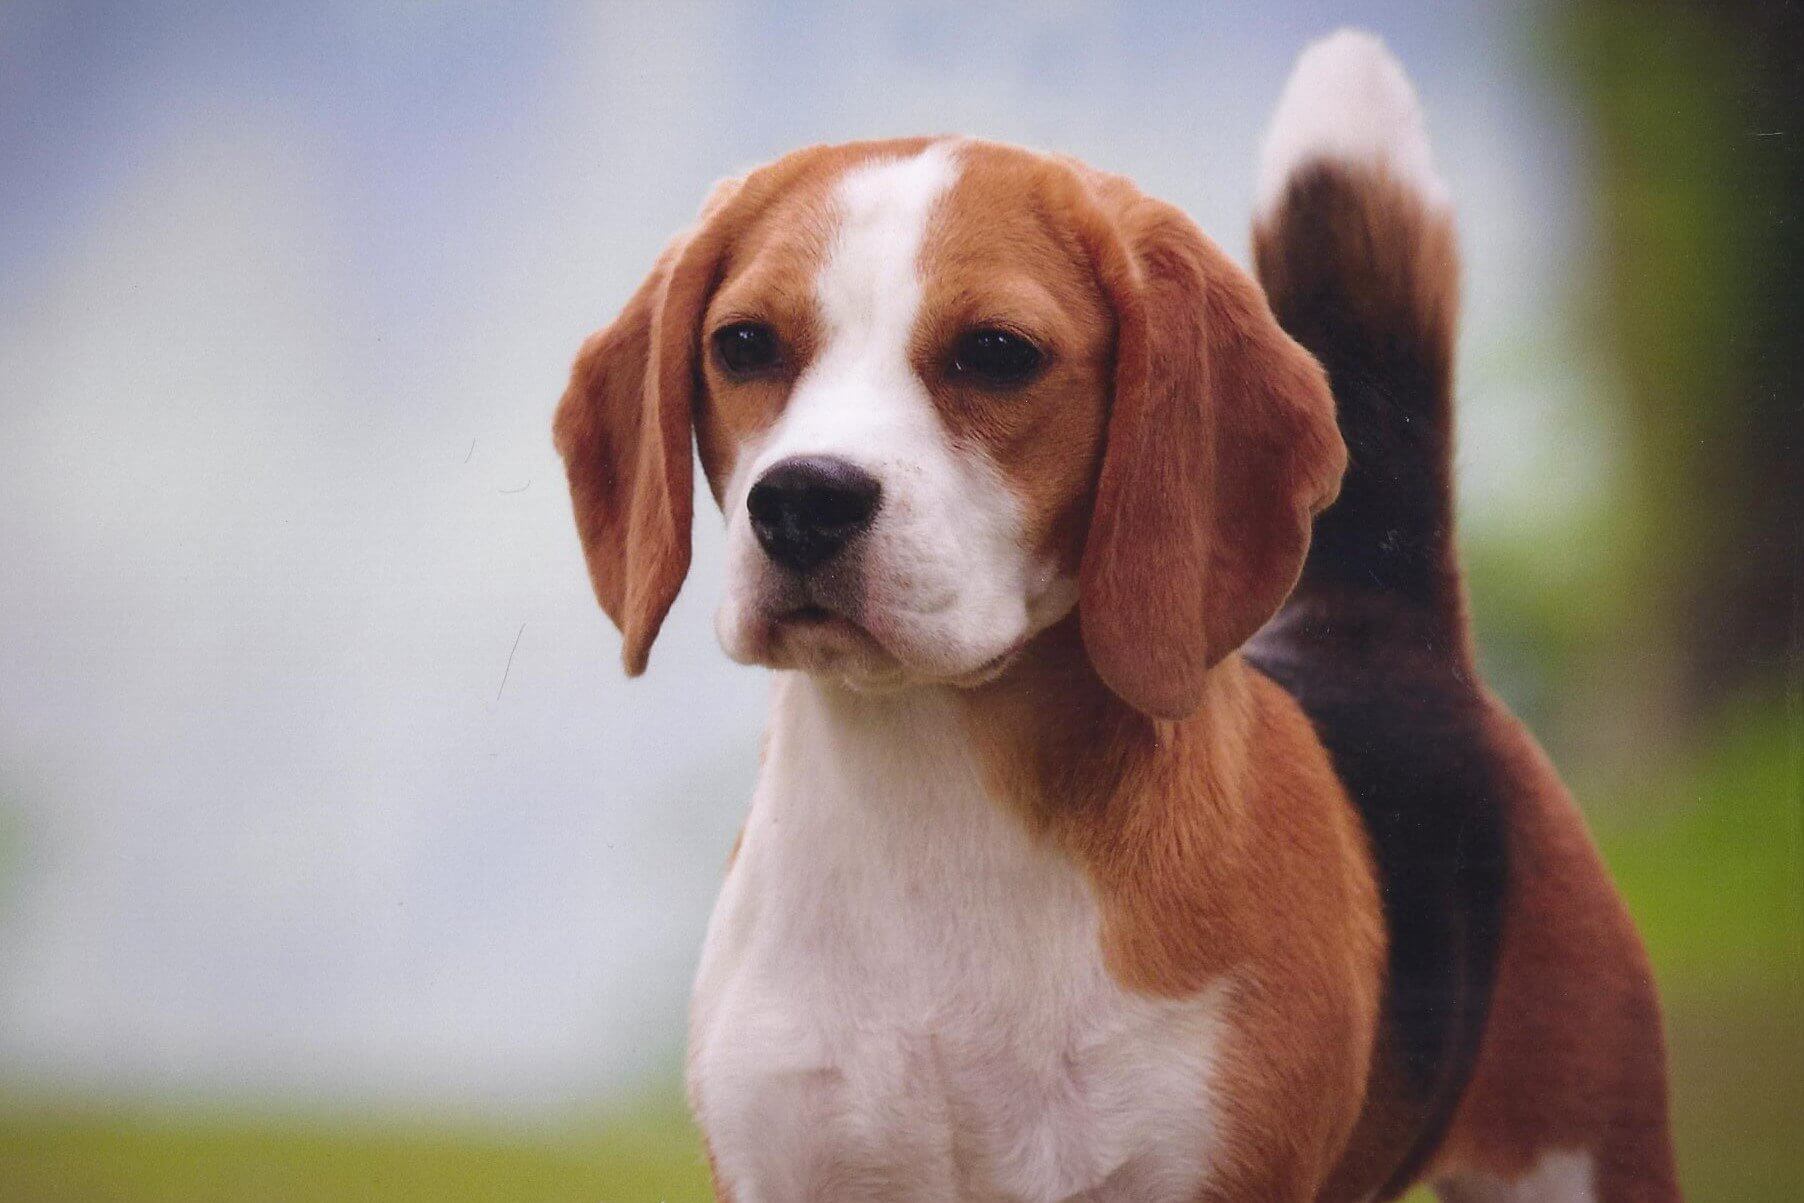 A Beagle standing in grass.